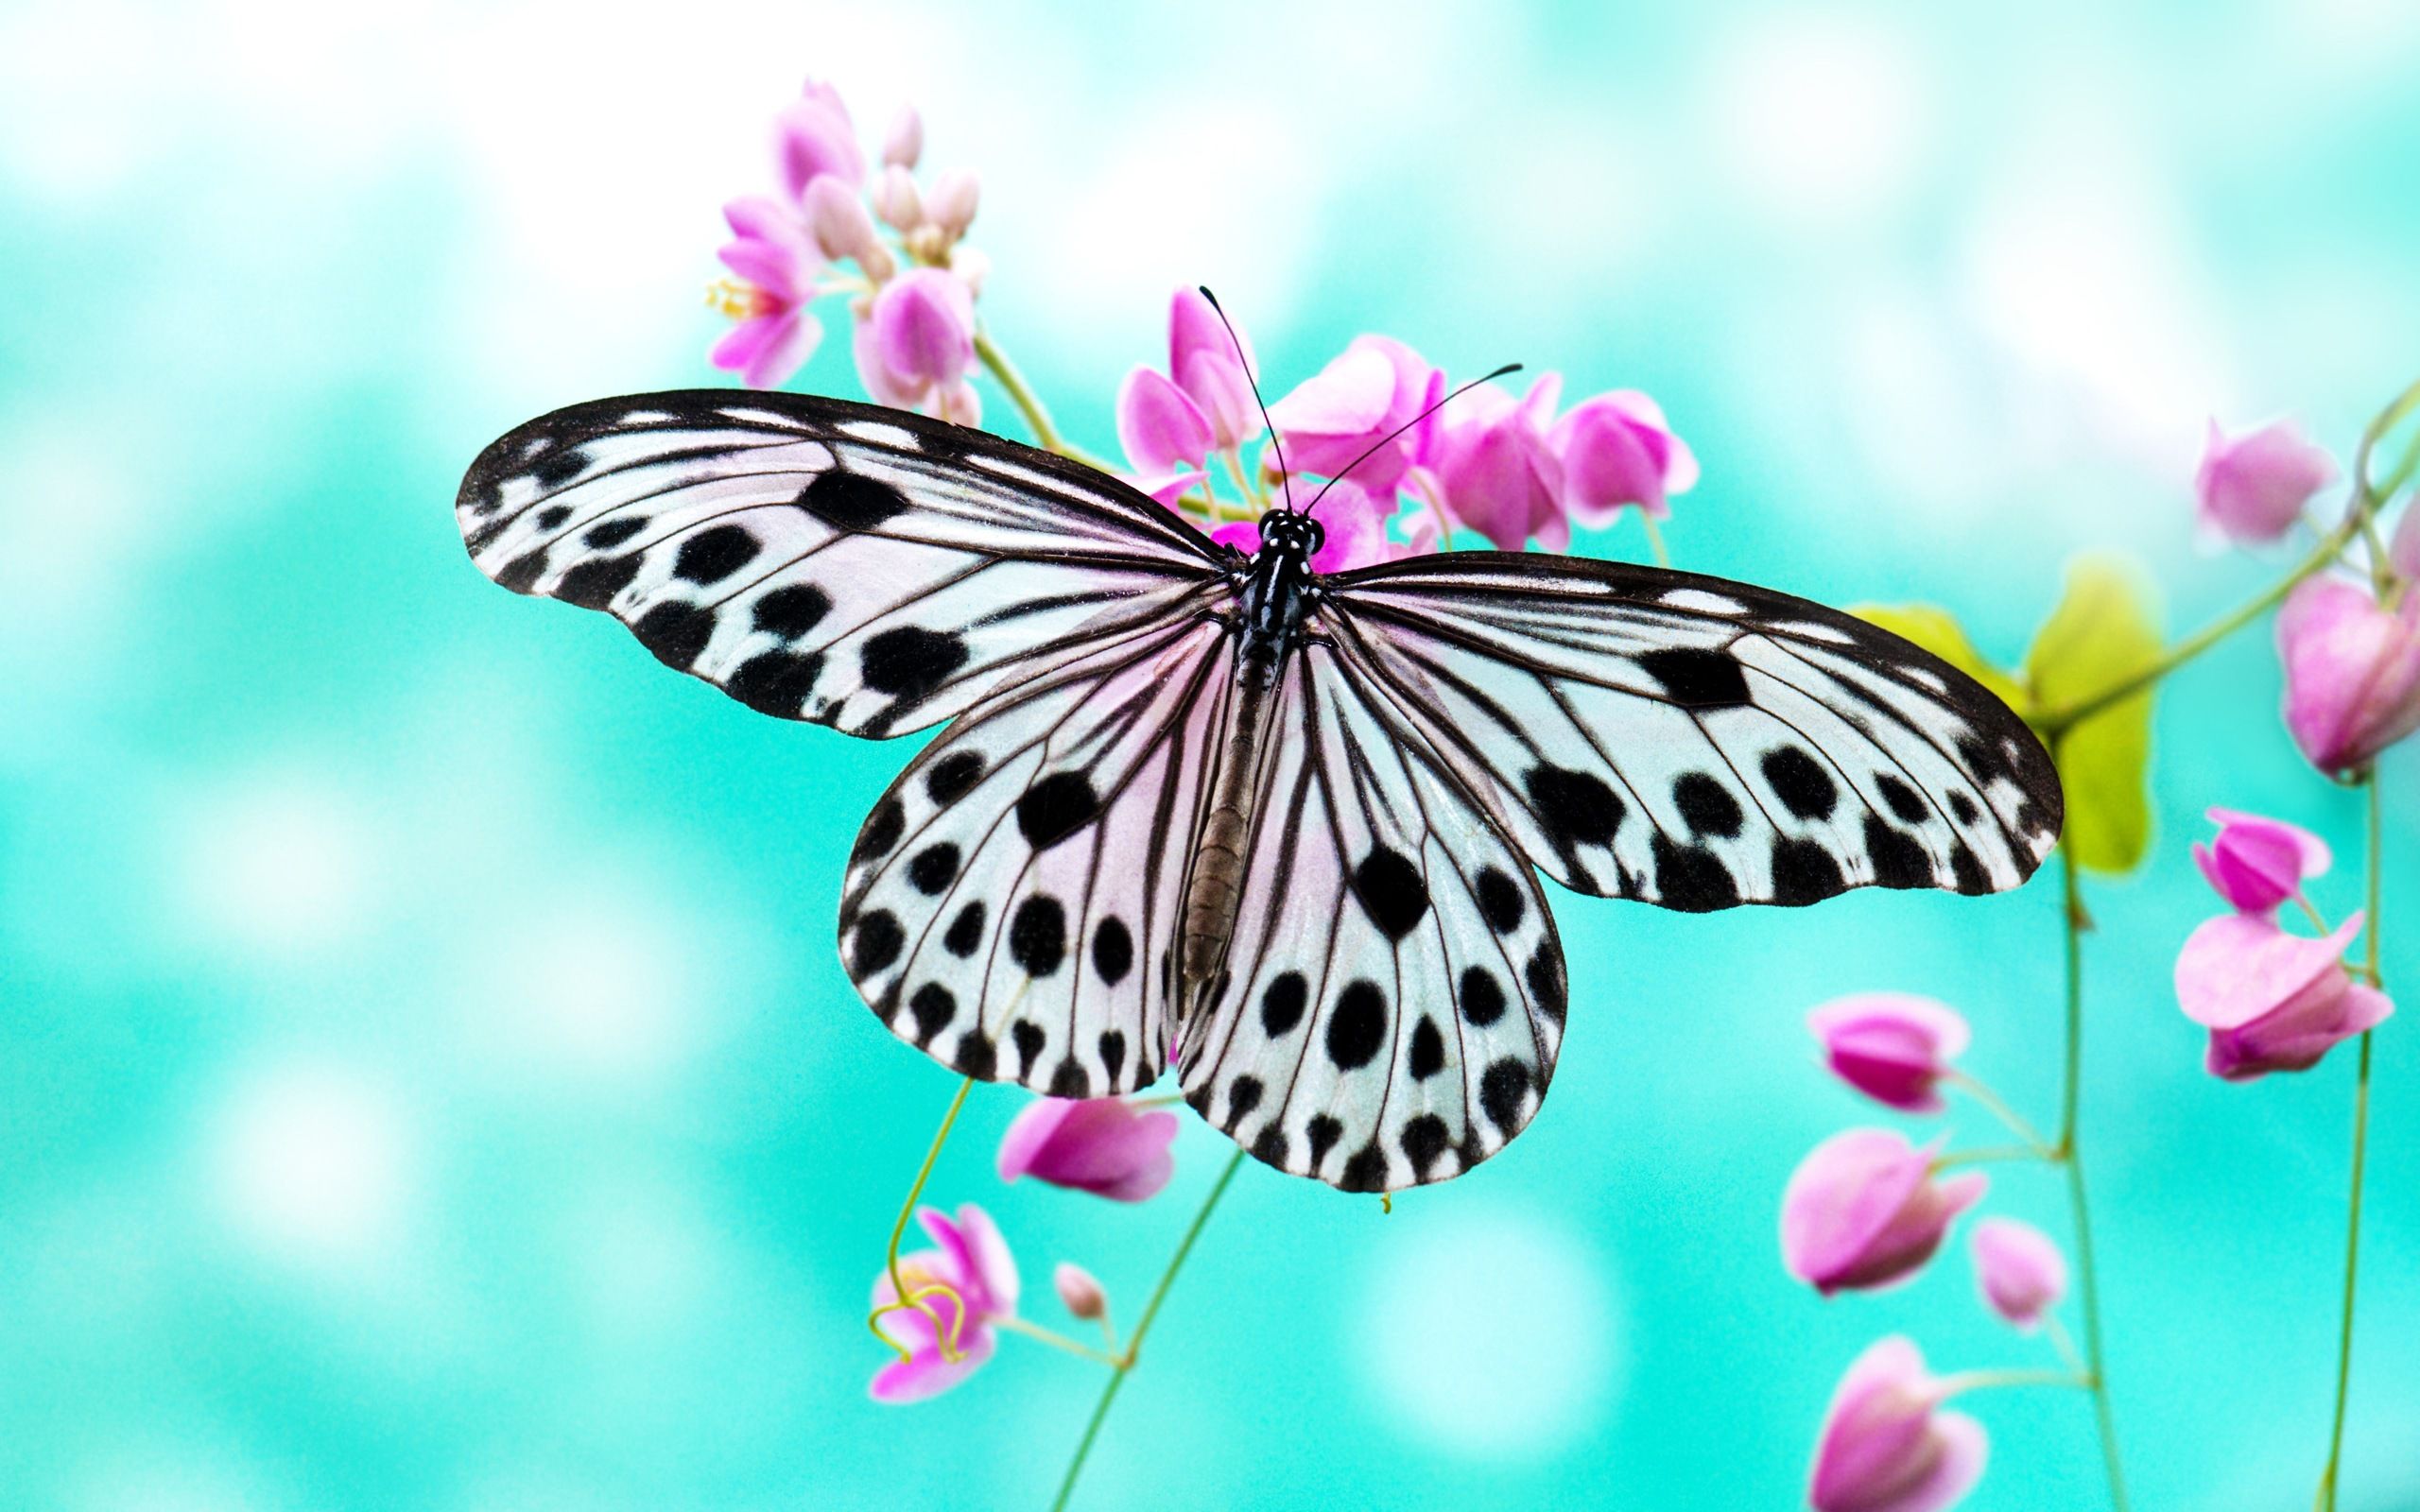 hd images of butterfly